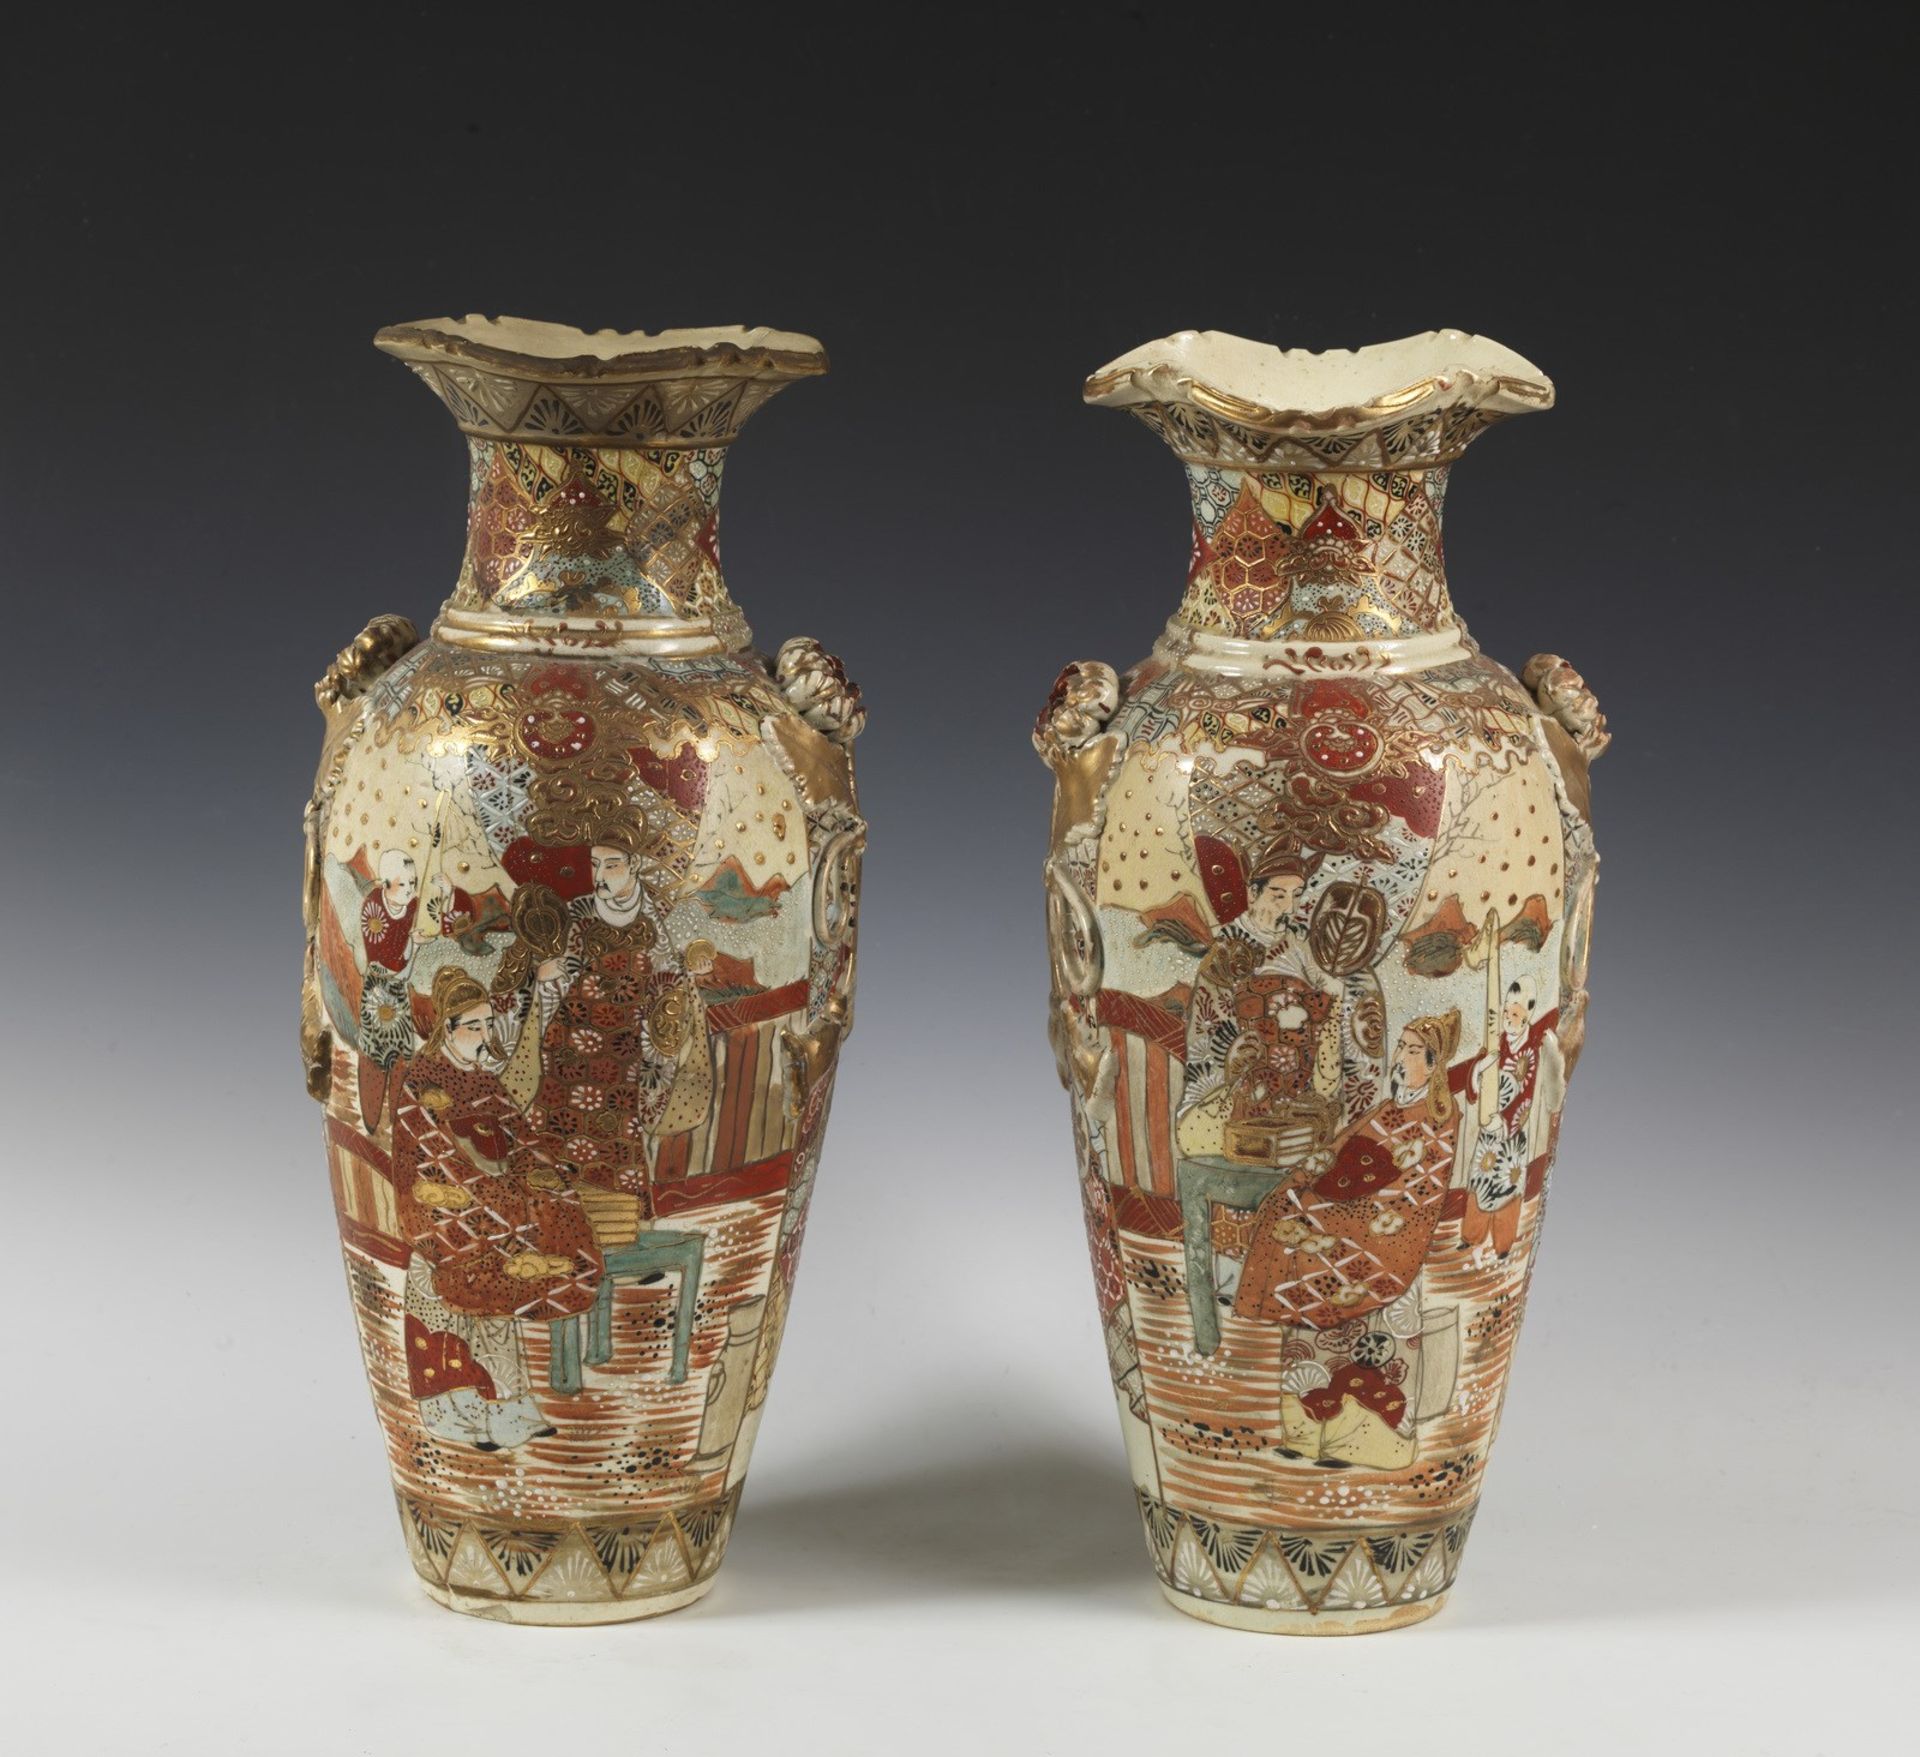 ARTE GIAPPONESE A pair of Satsuma pottery vases Japan, 19th century .